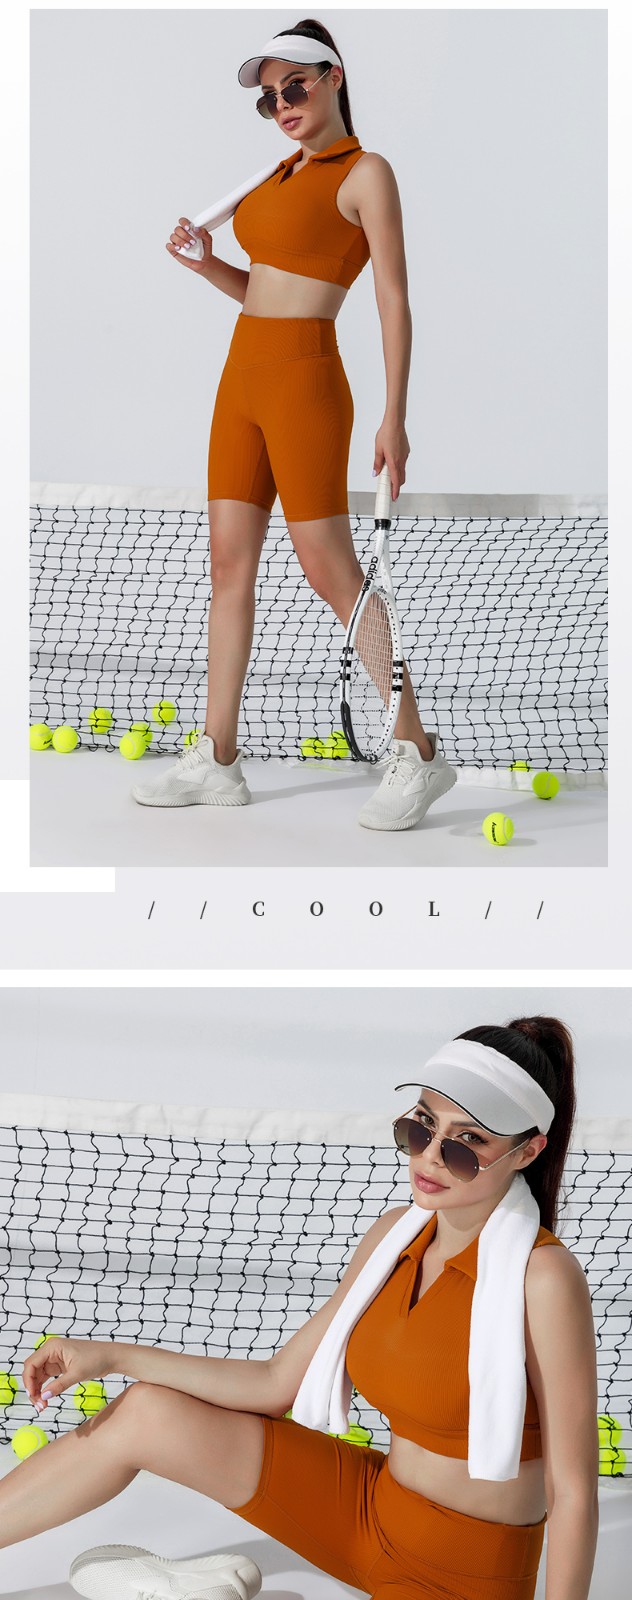 soft women's tennis outfits for-sale for ladies-4